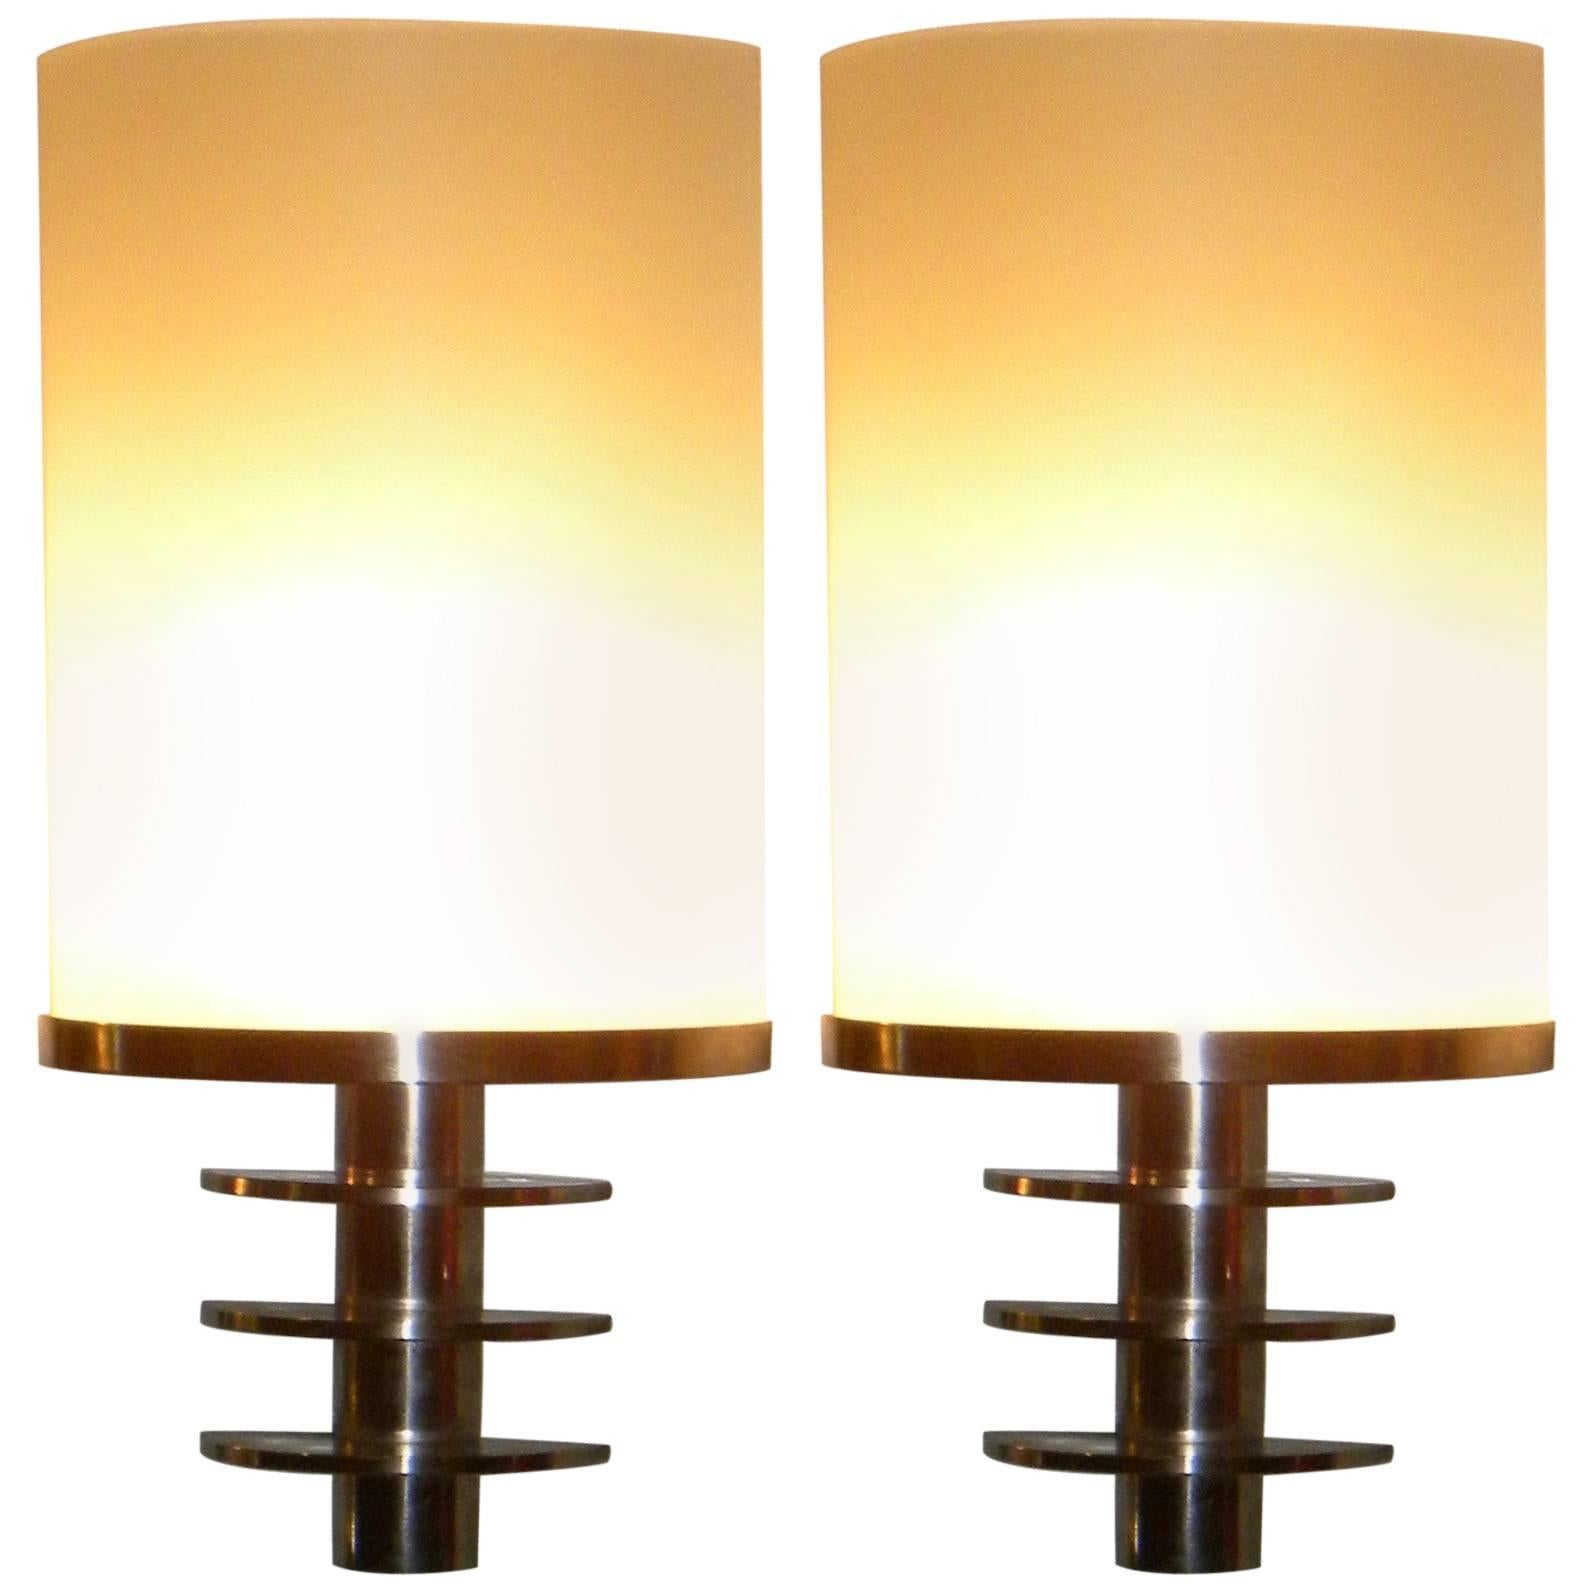 French Art Deco Theatre Style Industrial Sconces